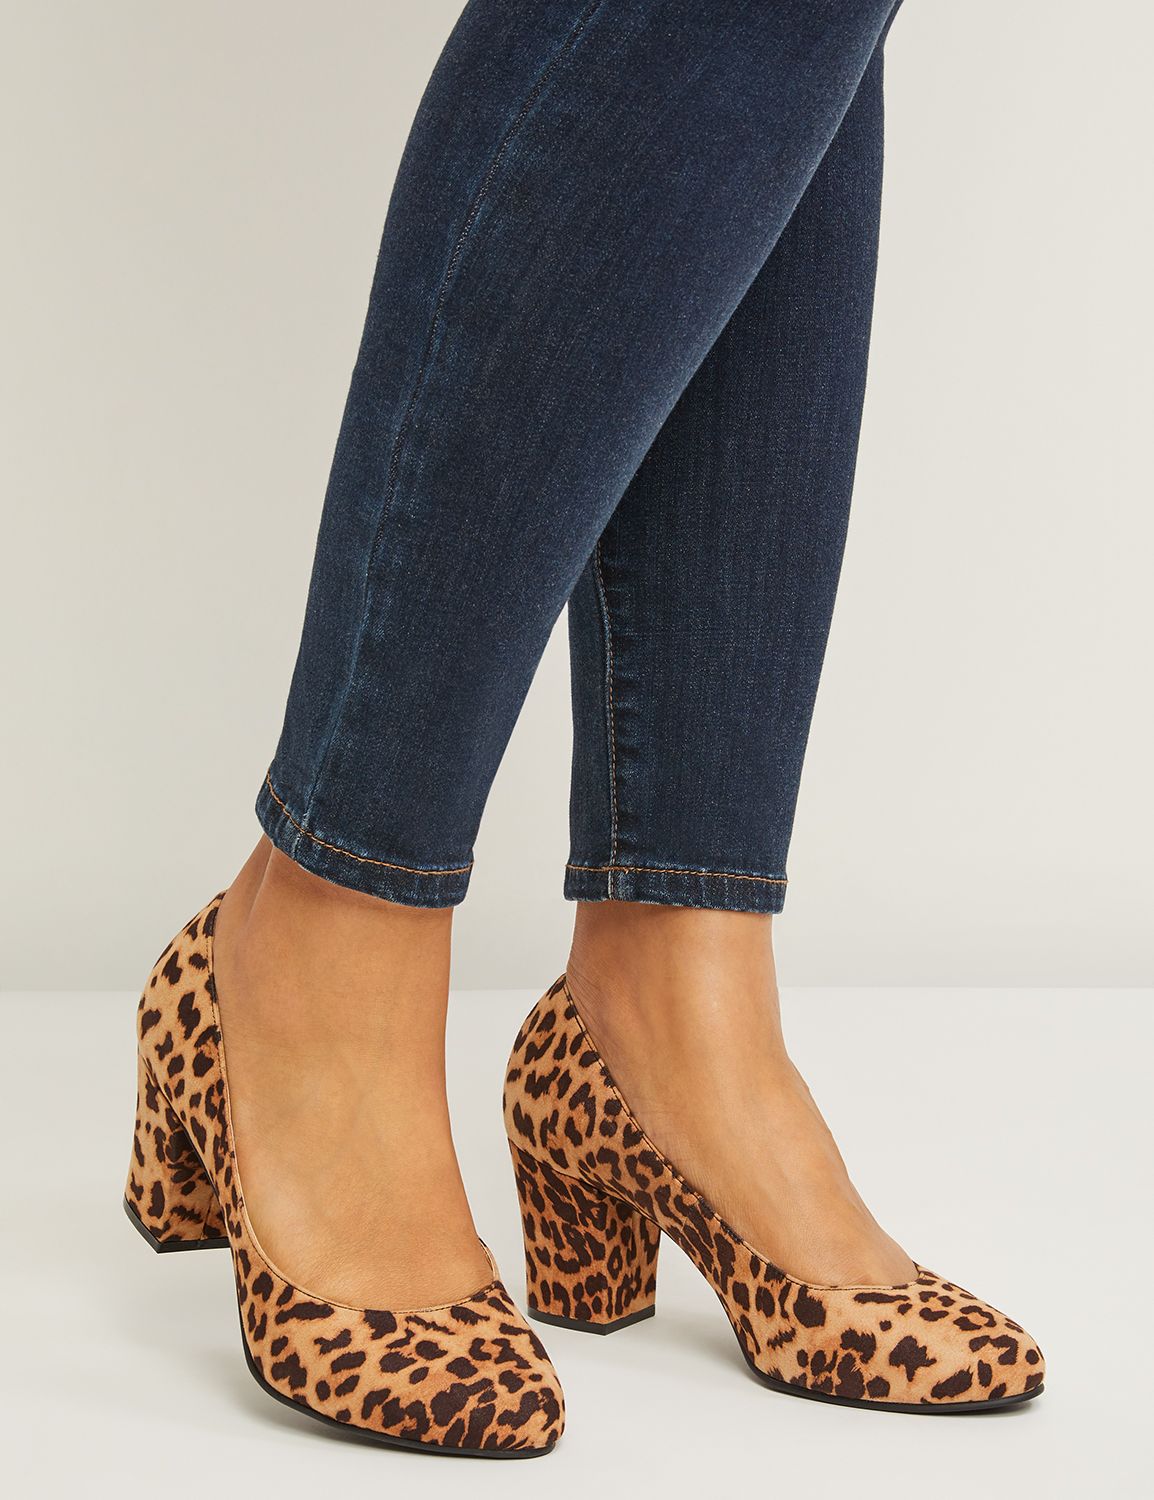 Wide Width Shoes For Women | Lane Bryant